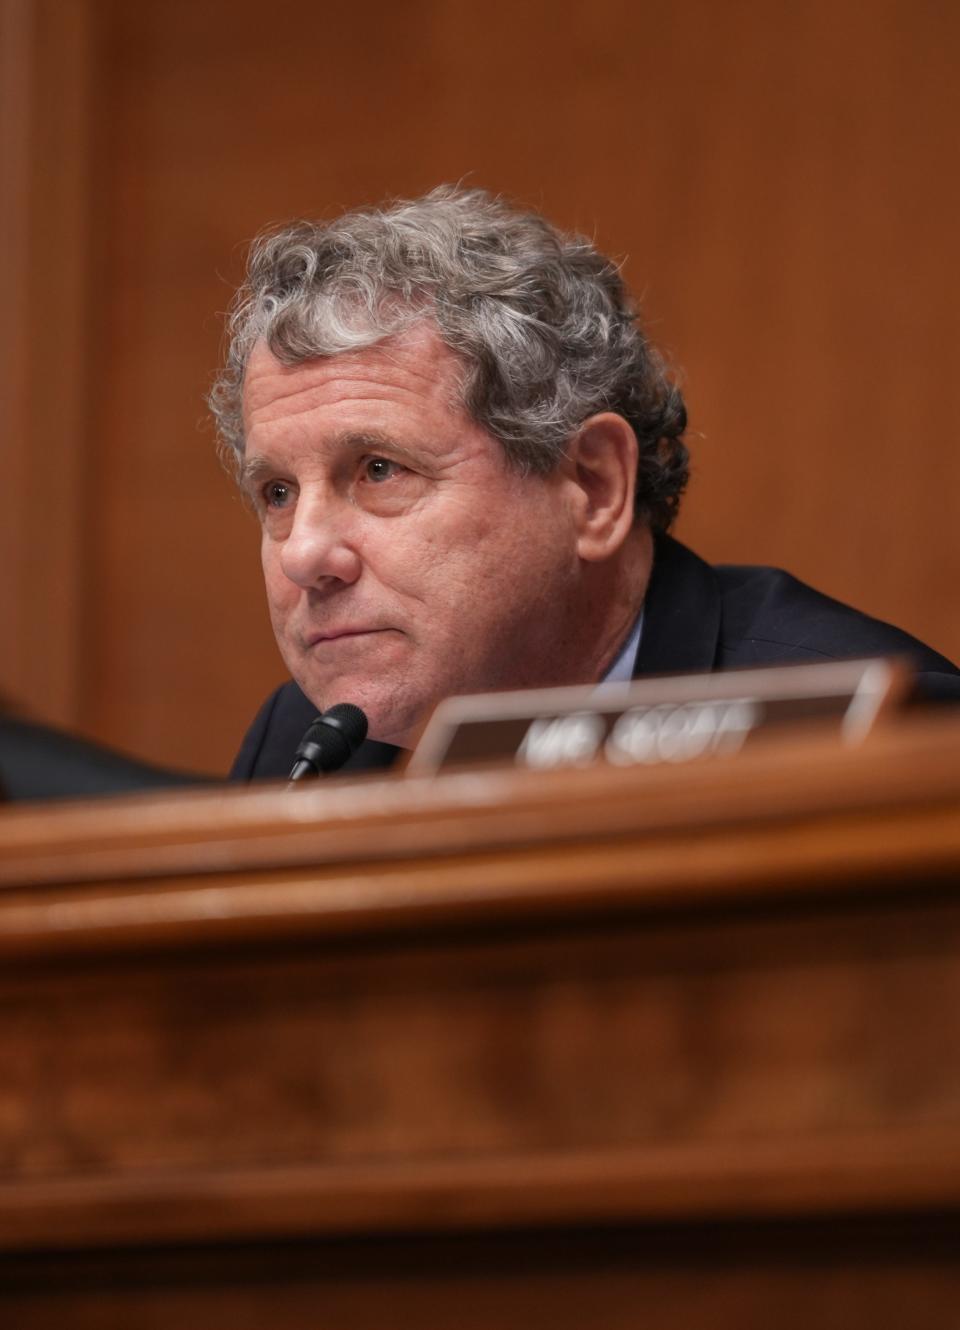 Sen. Sherrod Brown, D-Ohio, works in Washington on Sept. 12, 2023. Sen. Brown, who has represented Ohio since 2007, is running for reelection in 2024.